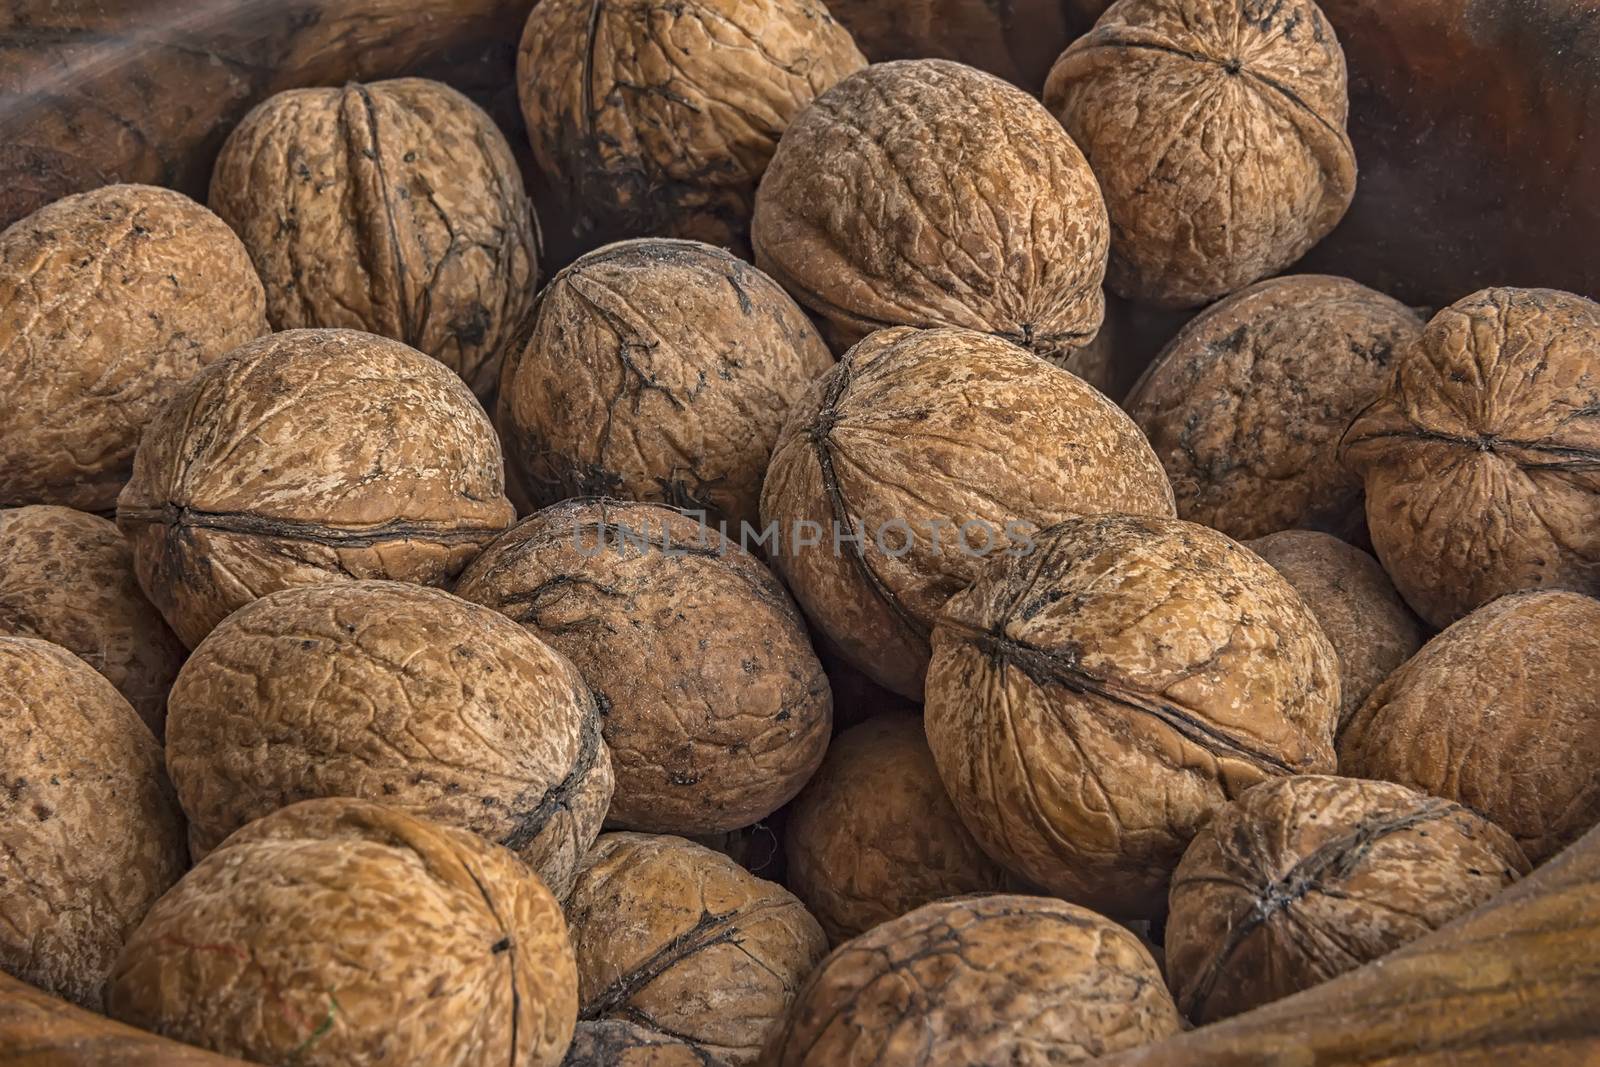 Lots of walnuts by EdVal